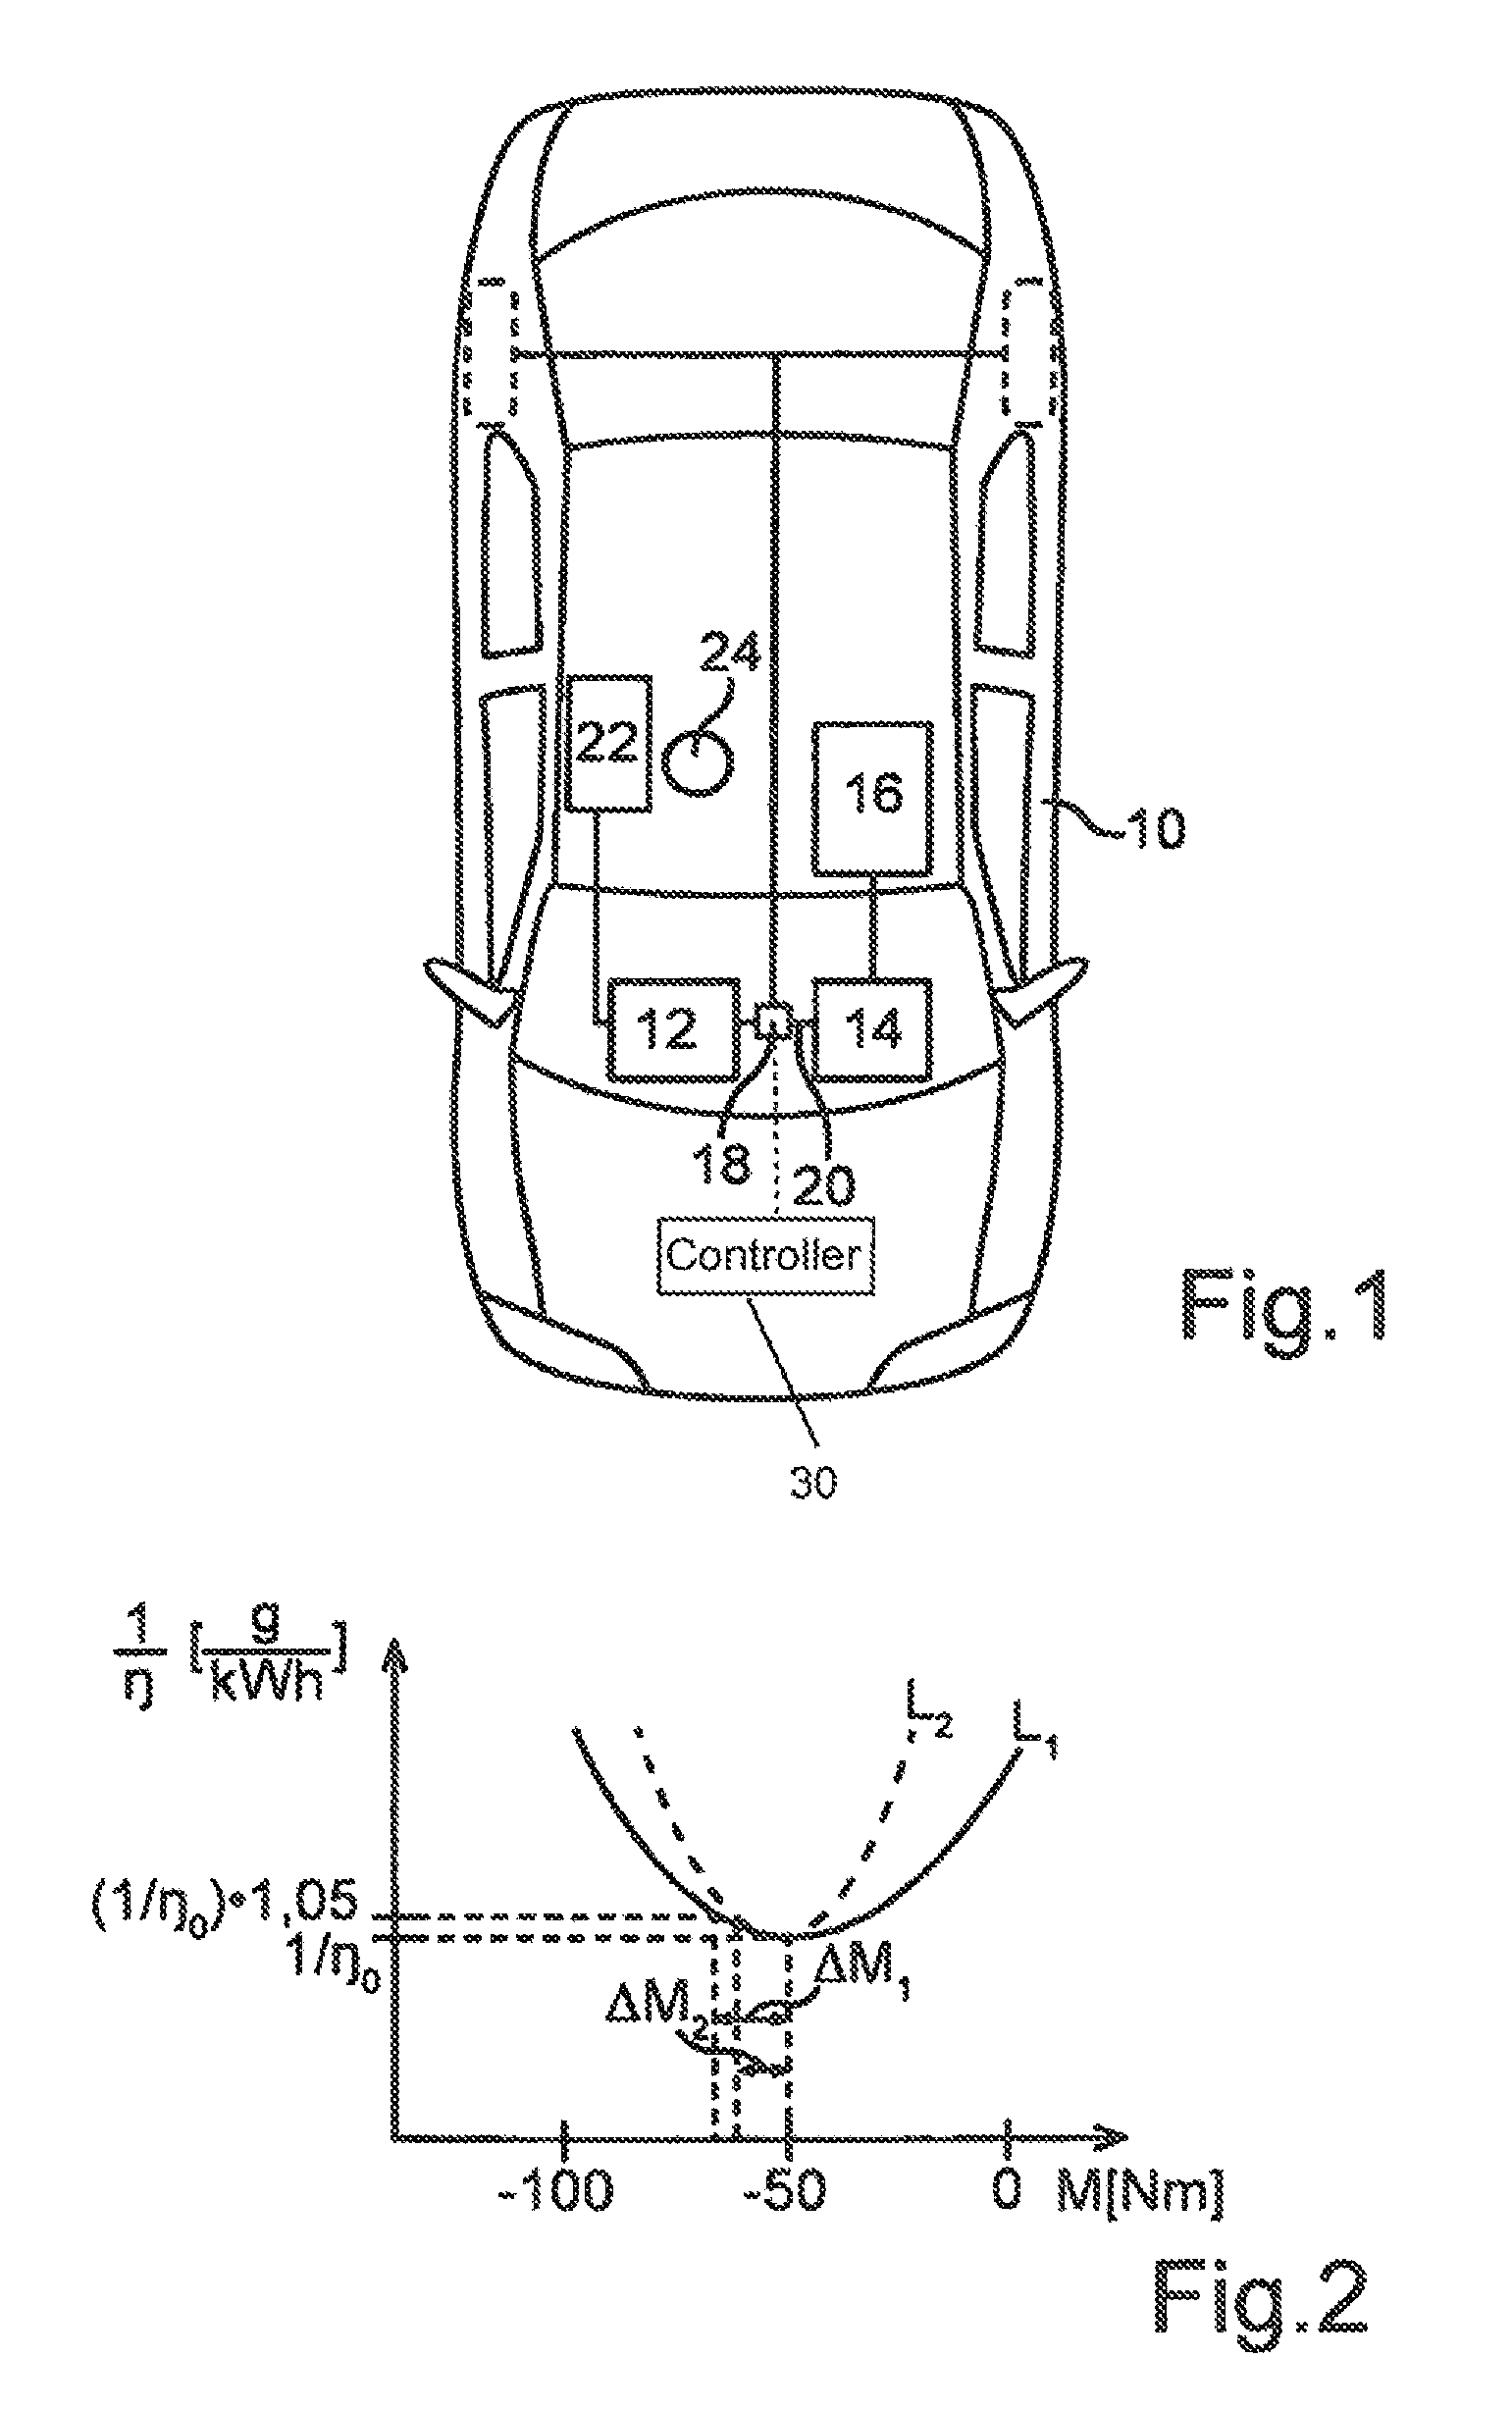 Method for operating a vehicle with an internal combustion engine and a generator